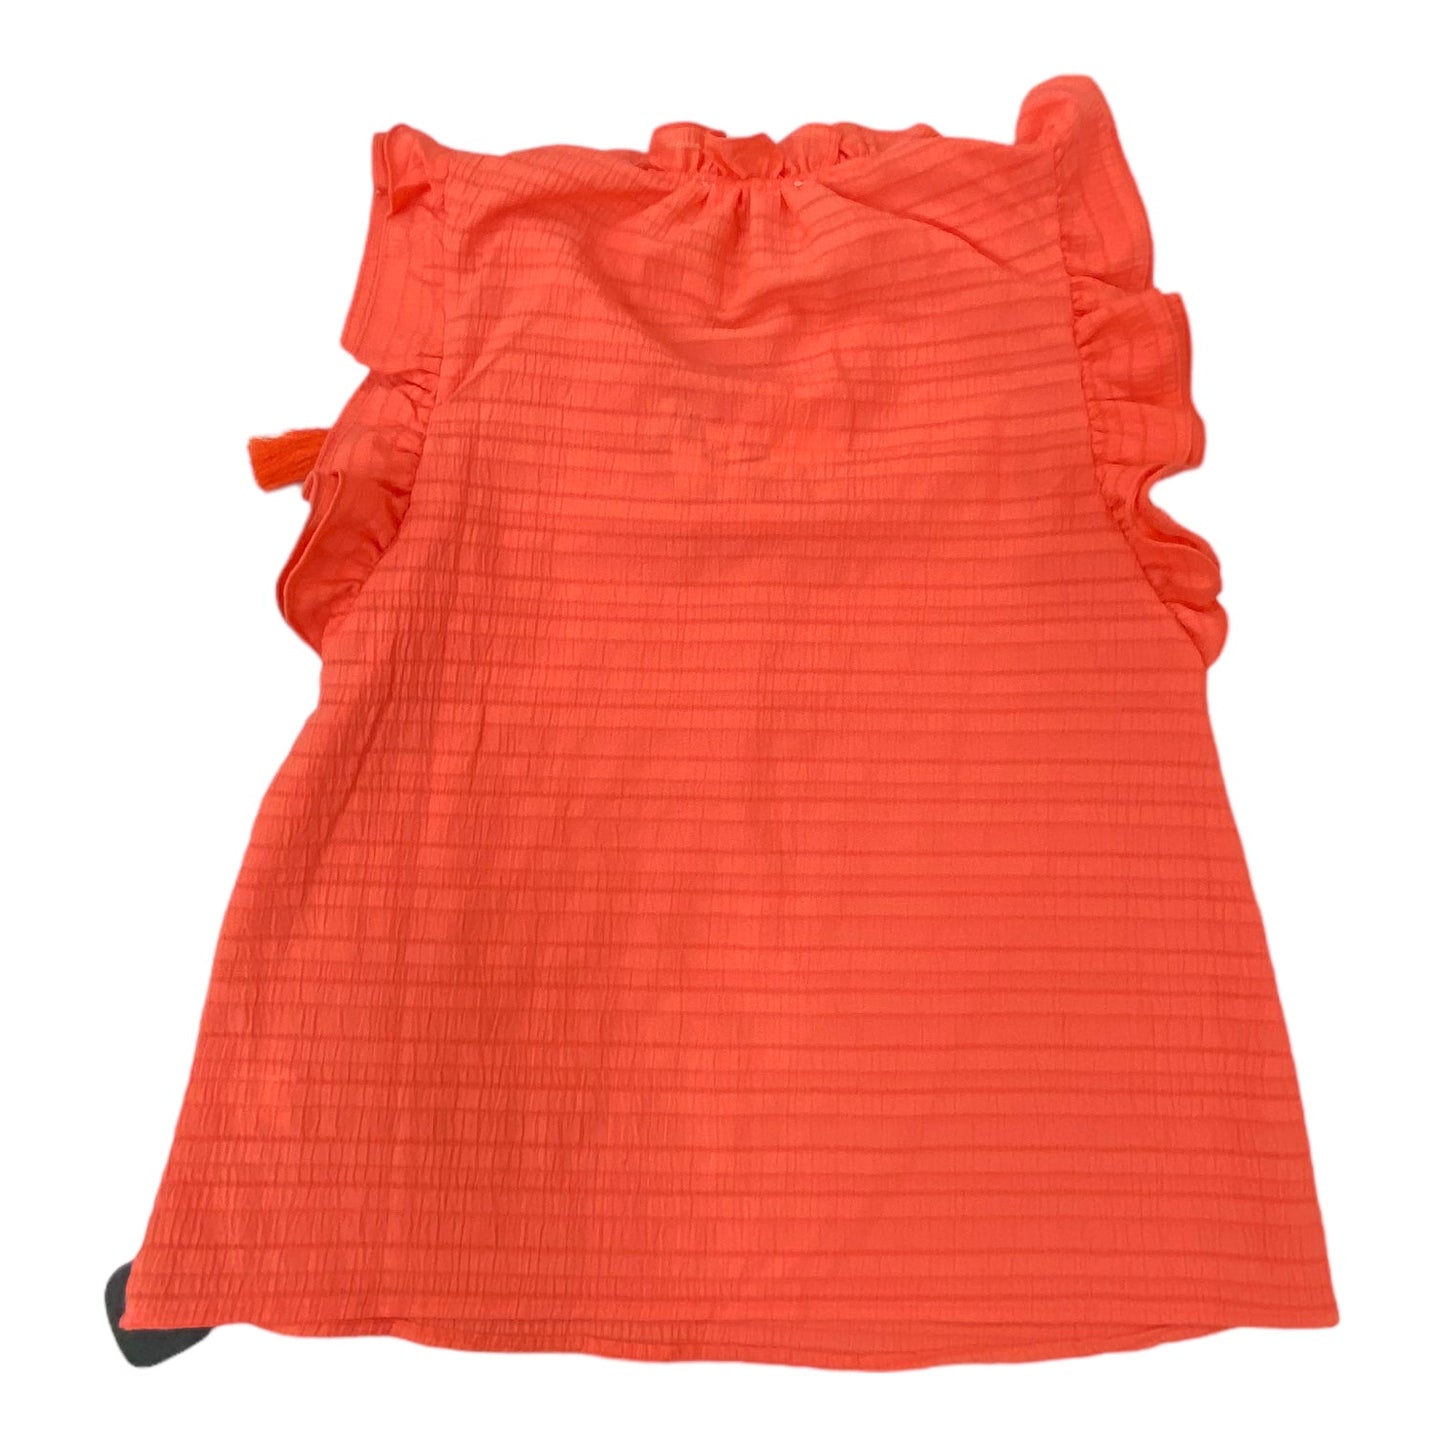 Coral Top Sleeveless Thml, Size M